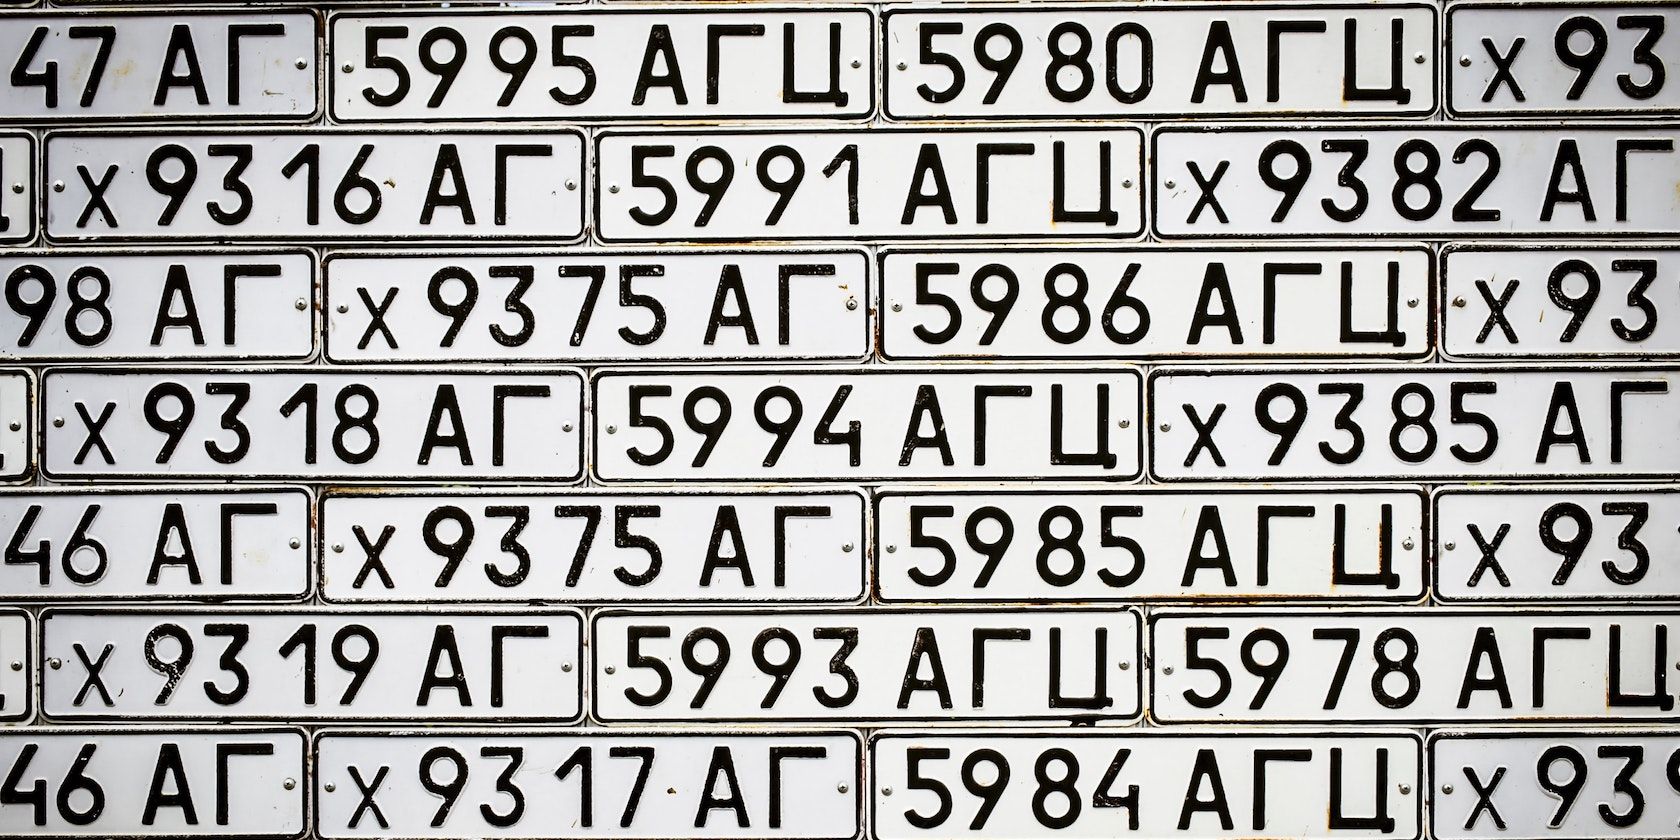 A set of registration plates with various numbers, letters, and other symbols